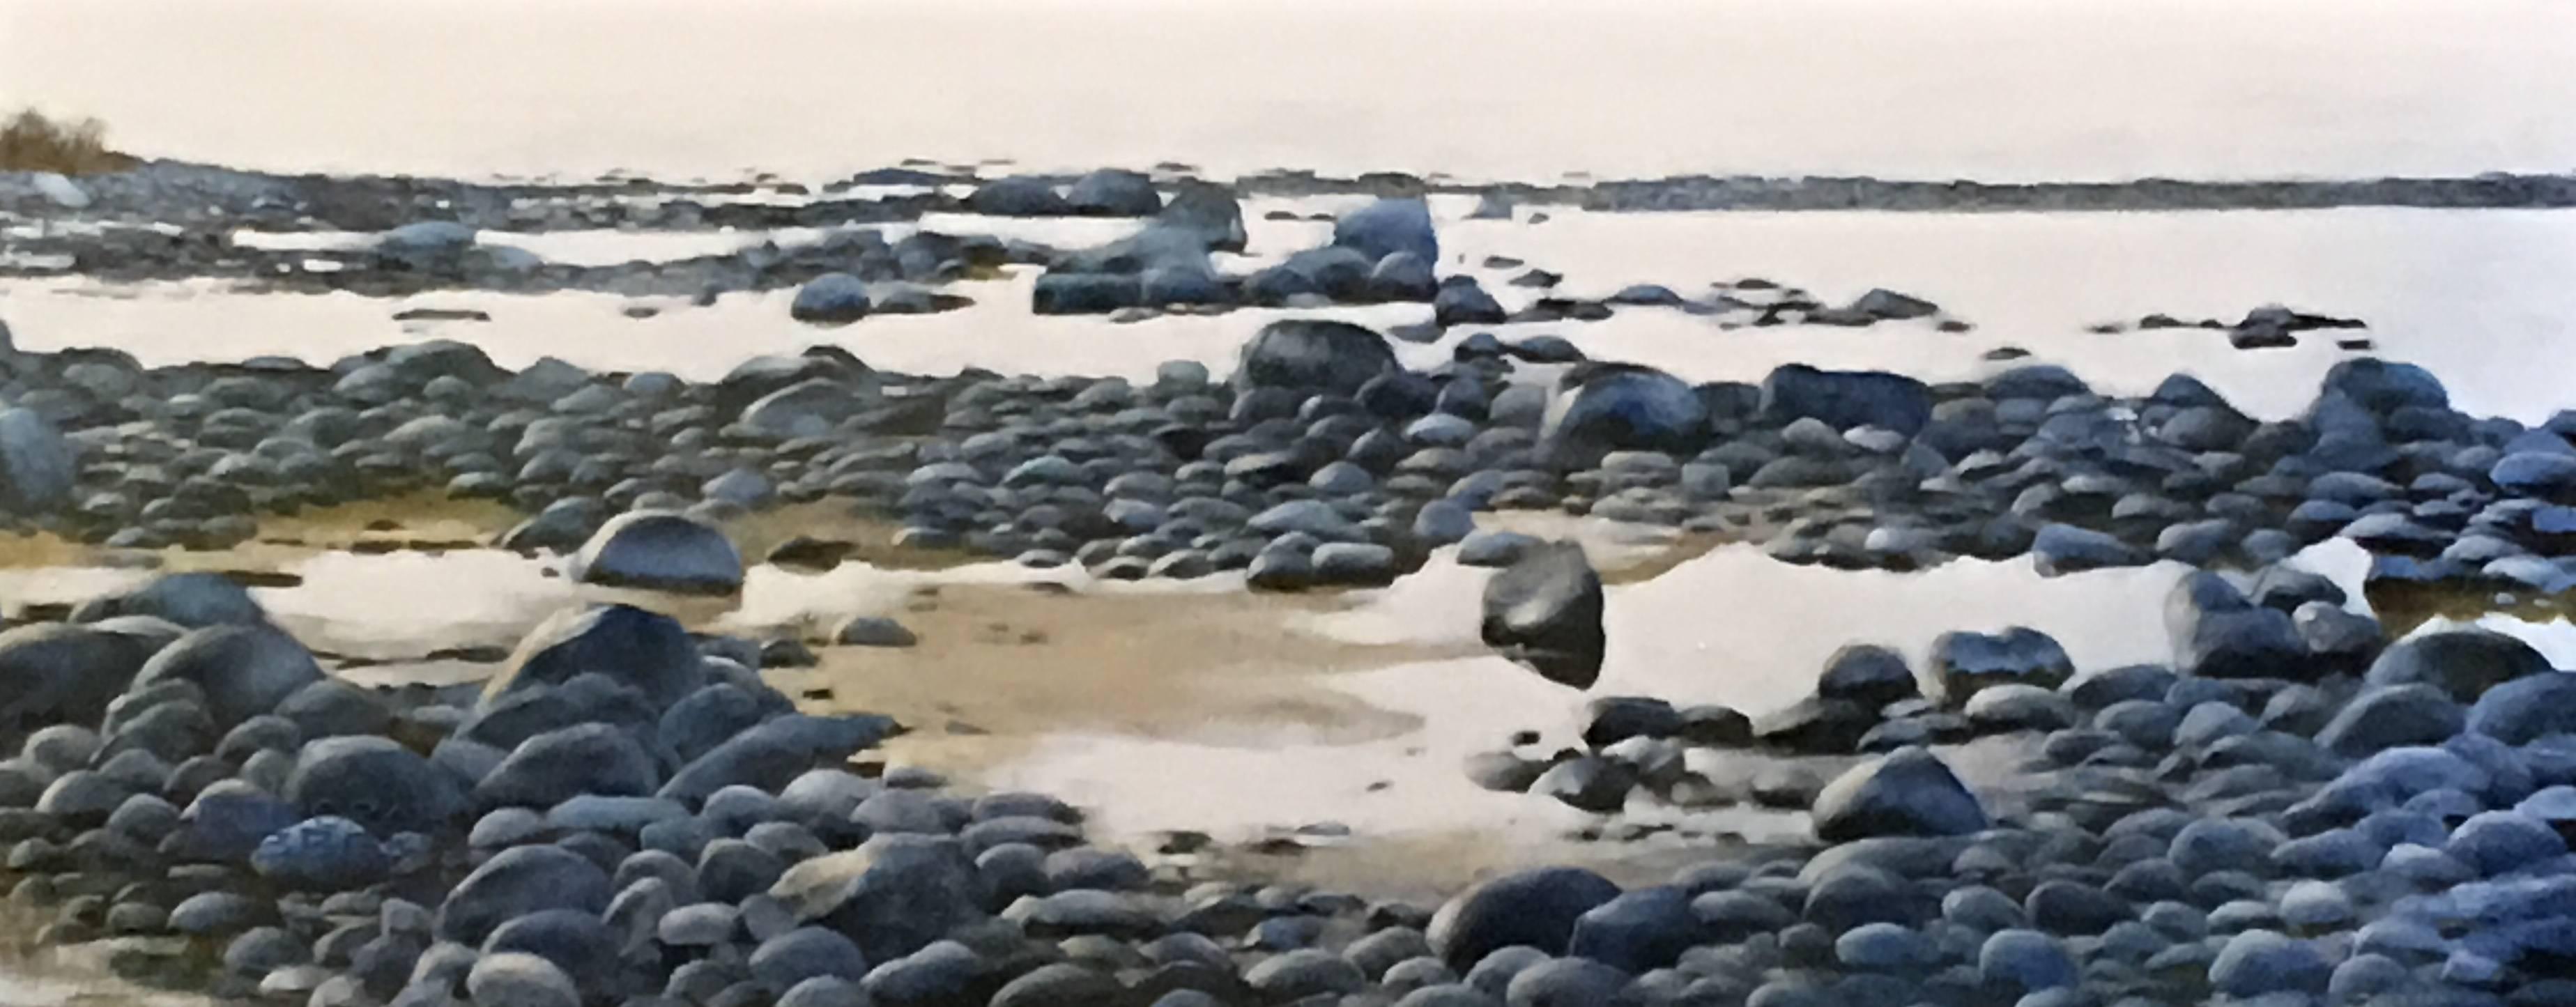 Deborah Ebbers Landscape Painting – Going Blue - Original Oil on Canvas Painting with Water and Stones at the Shore